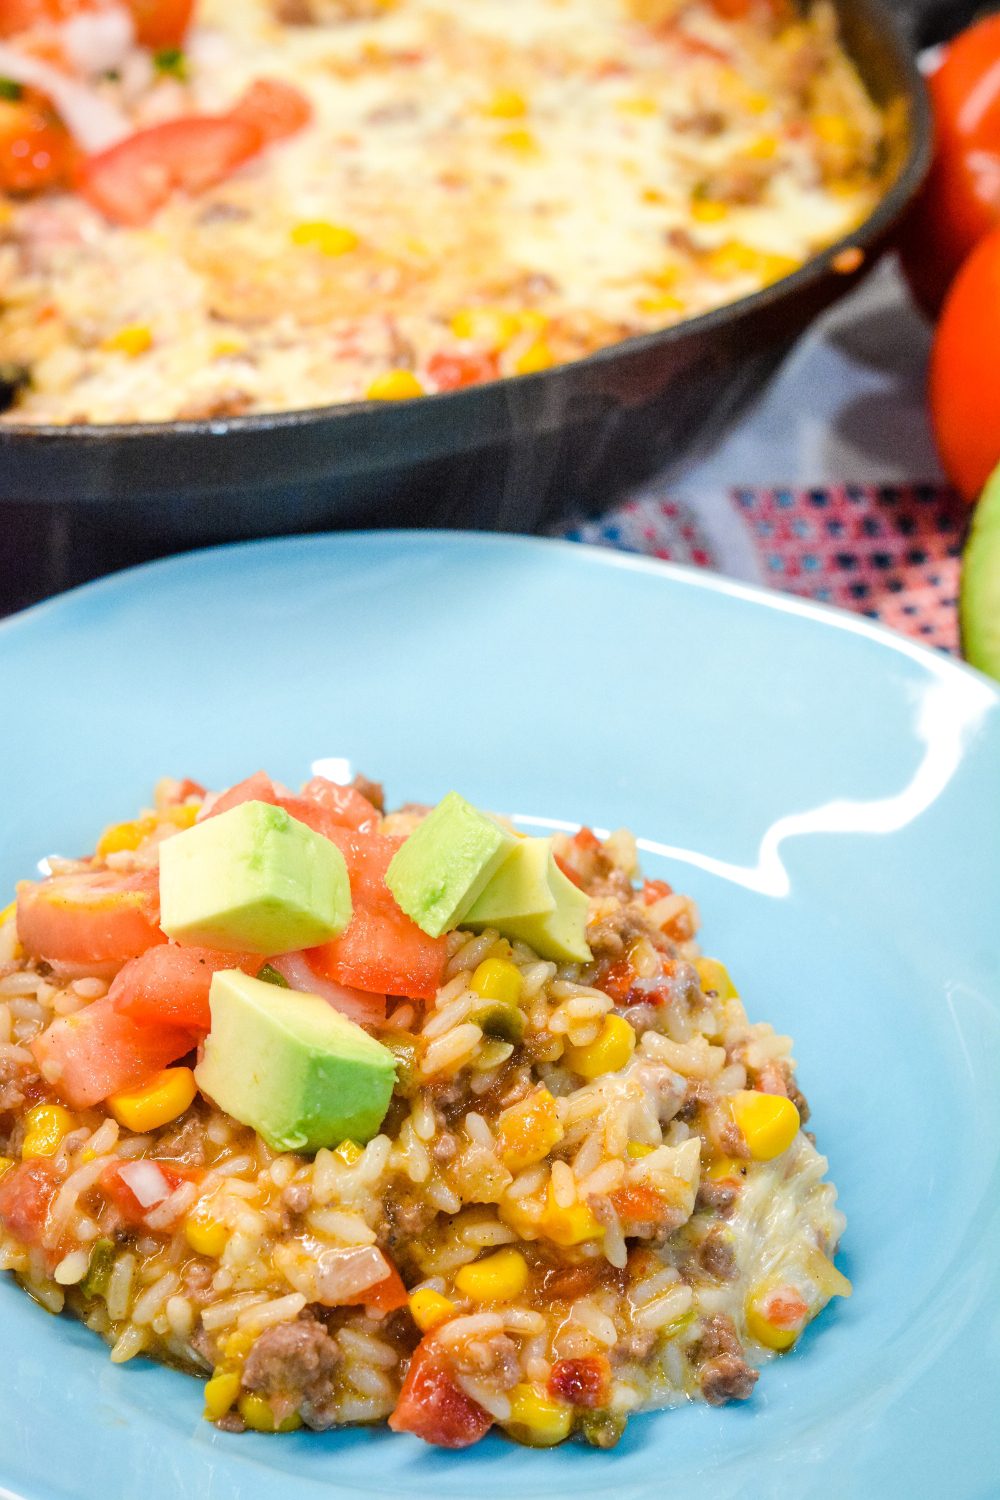 If you are looking for a quick and easy ground beef recipe, this arroz con carne molida is the perfect Mexican cheesy rice and ground beef skillet.